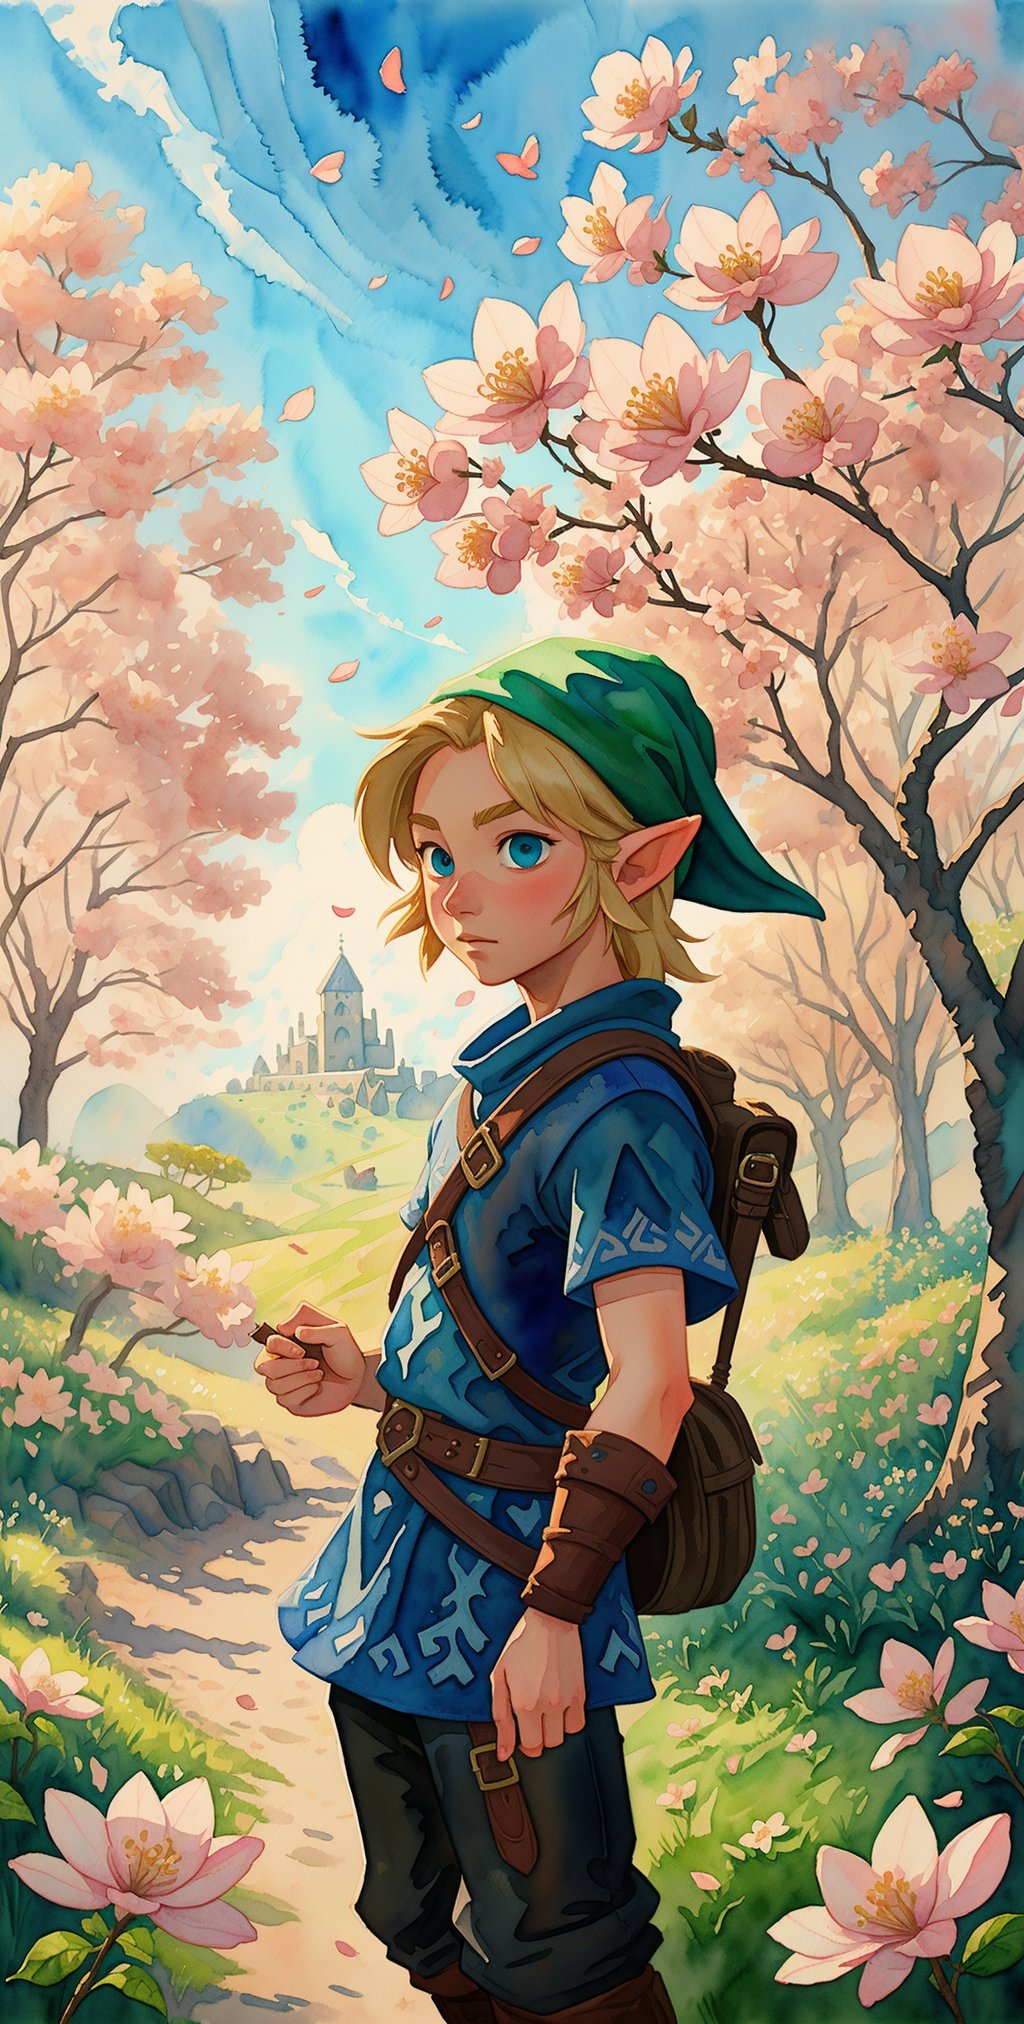 masterpiece,best quality,the legend of zelda,tunic,hat,1 boy,blonde hair,solo,flowers around,cherry blossoms,((watercolor)) painting,countryside